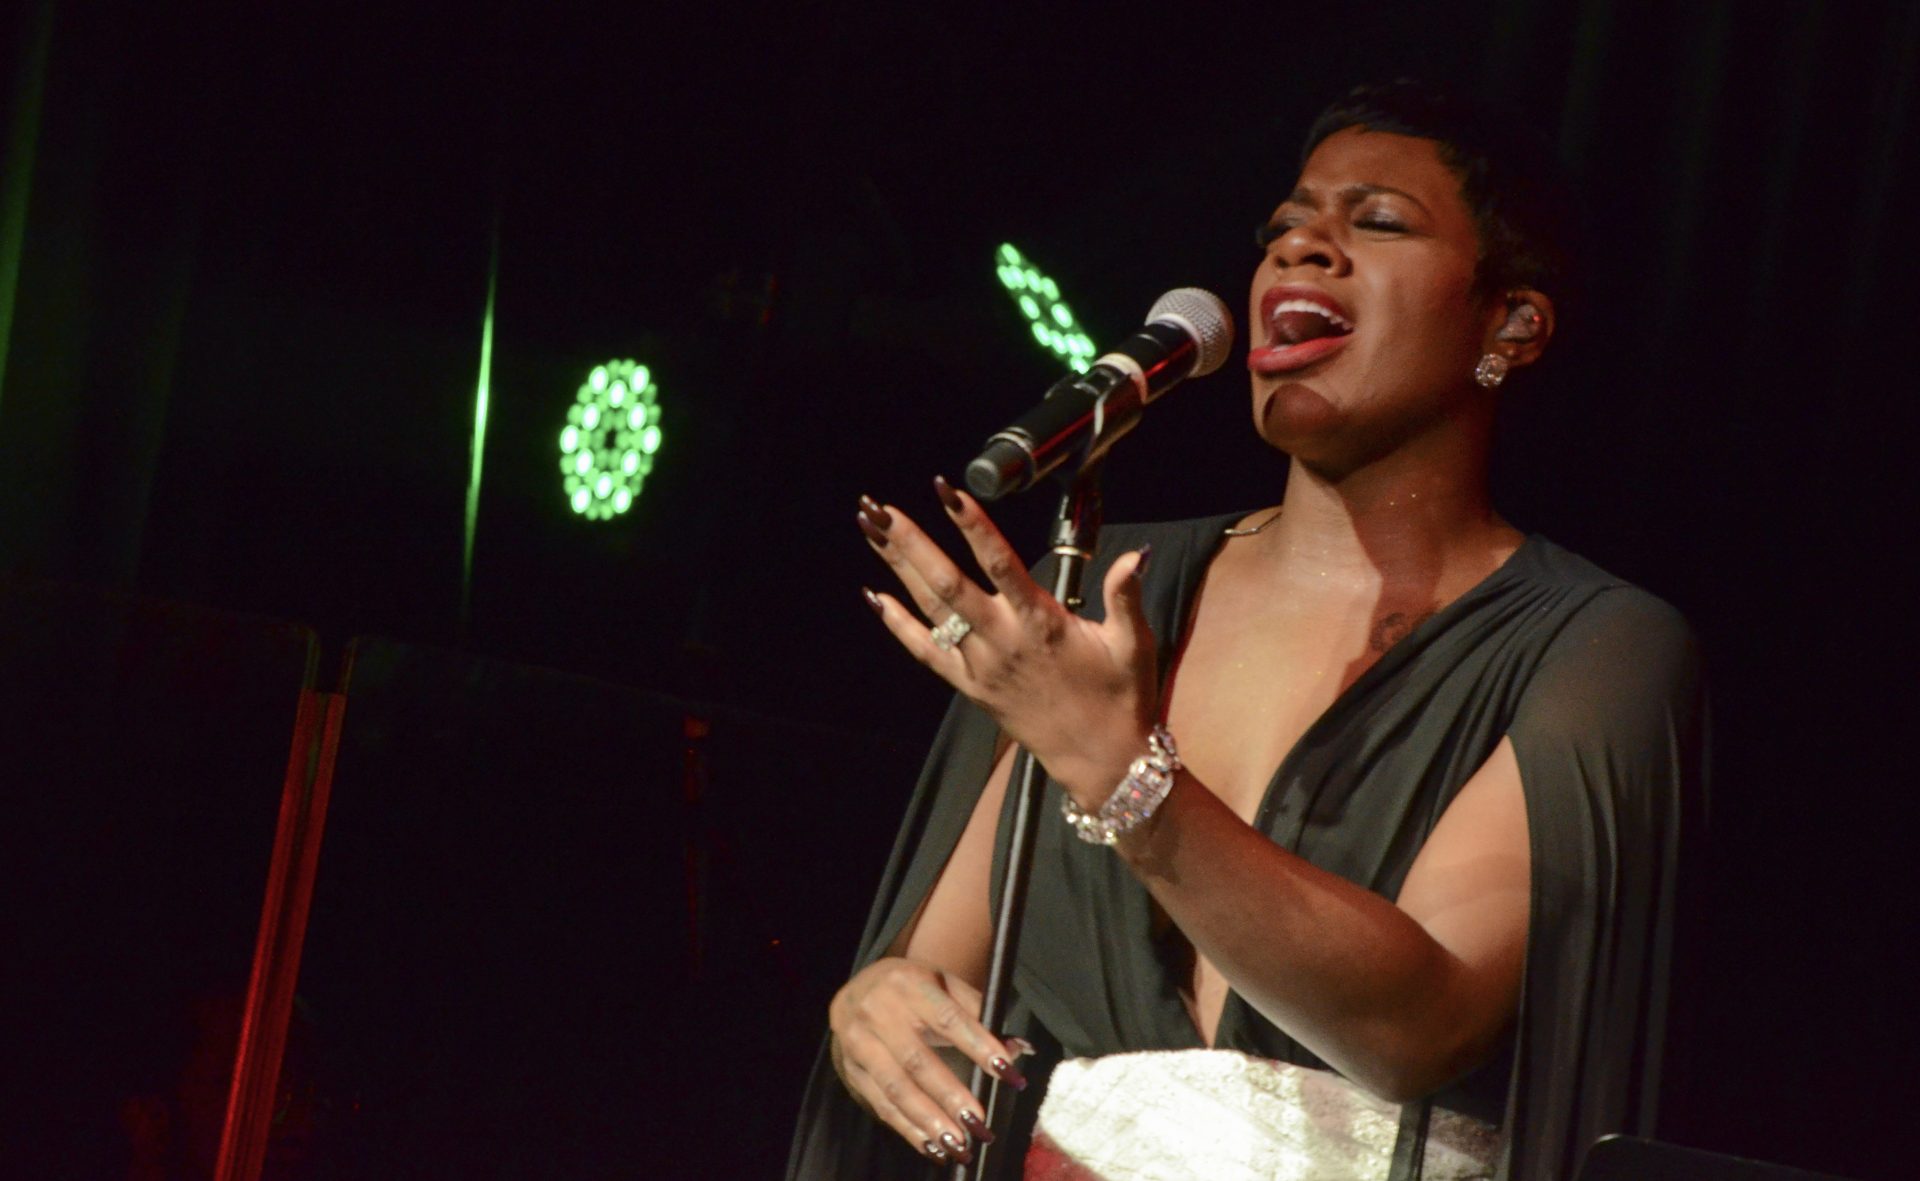 Fantasia delivers a magical Christmas performance at Highline Ballroom in NYC